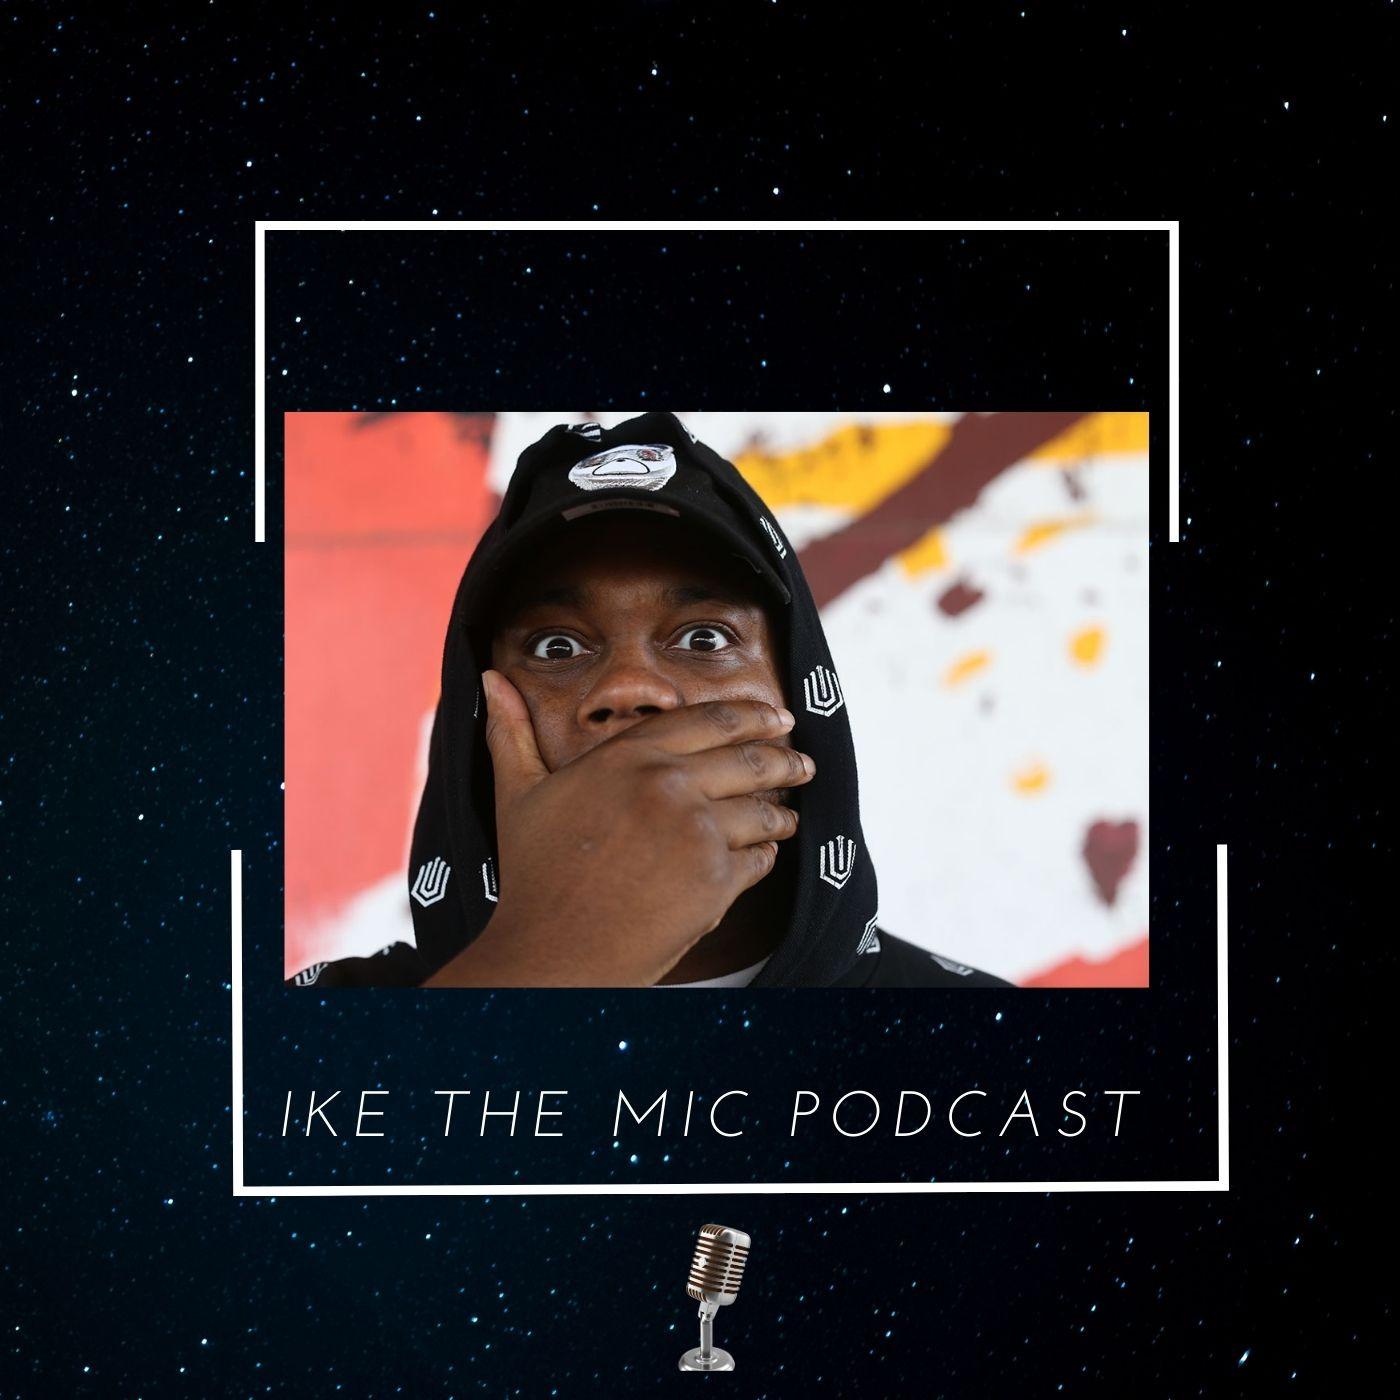 Ike The Mic Podcast